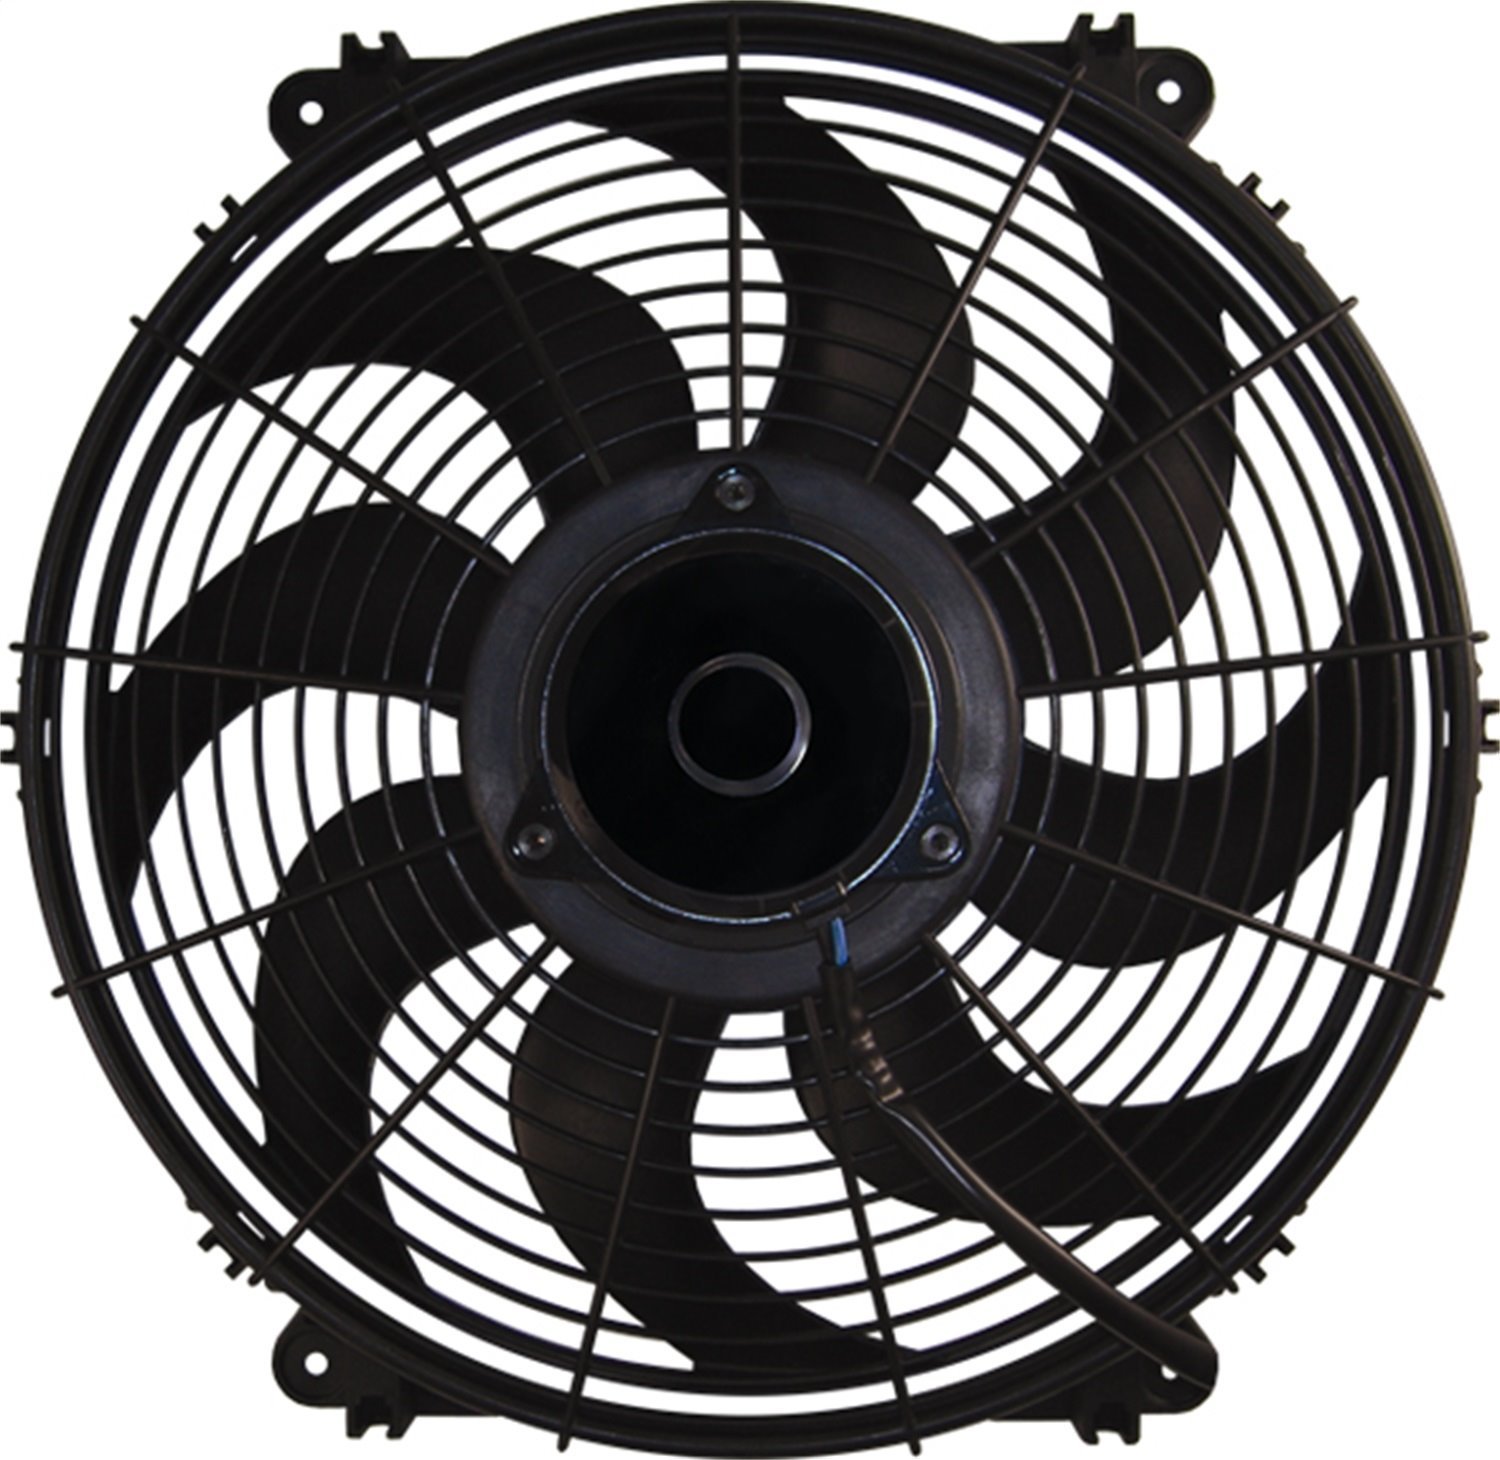 Pacesetter-Series Electric Cooling Fan, Diameter: 16 in., Type: Single